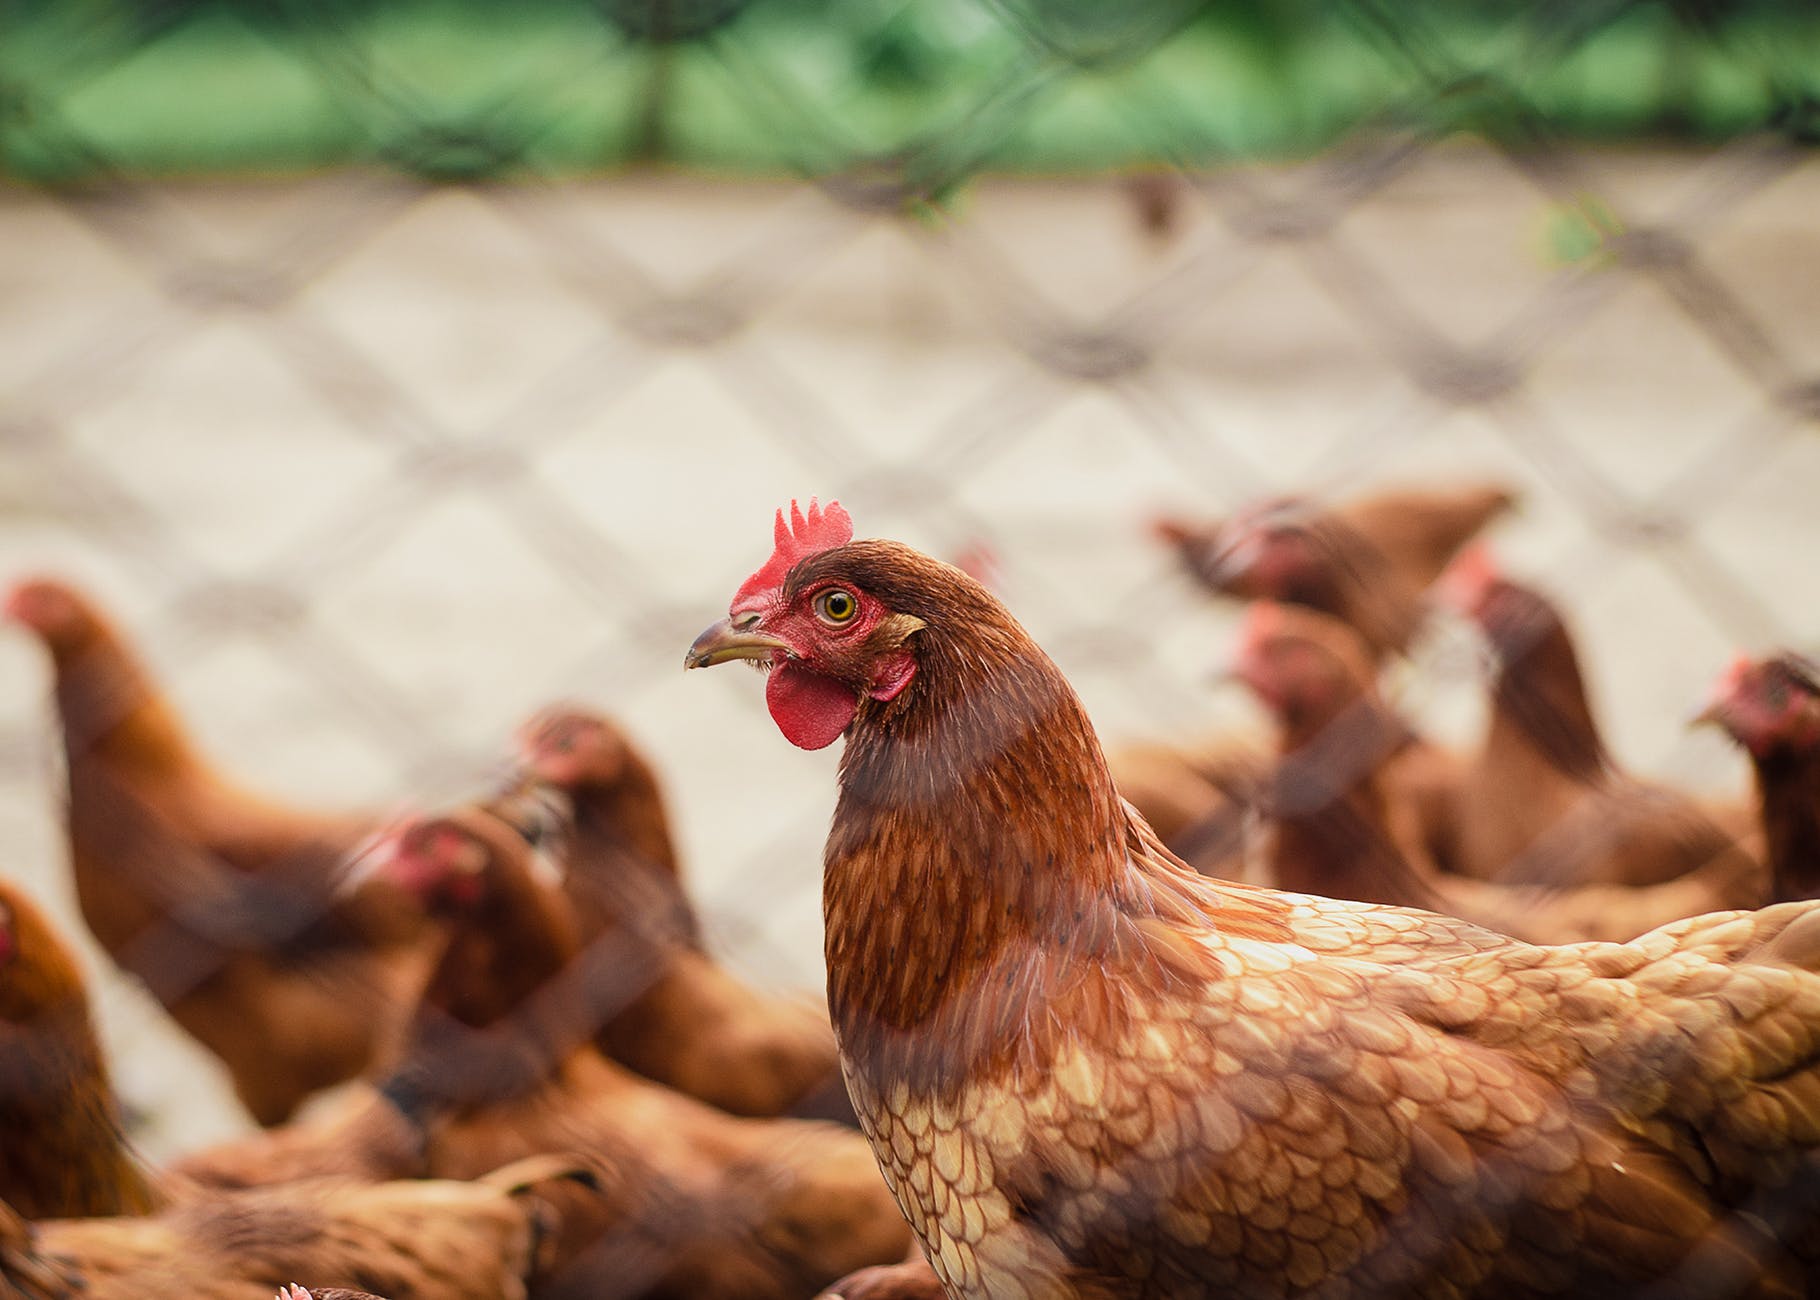 BUFFCI dangles native chicken contract growing with feeds